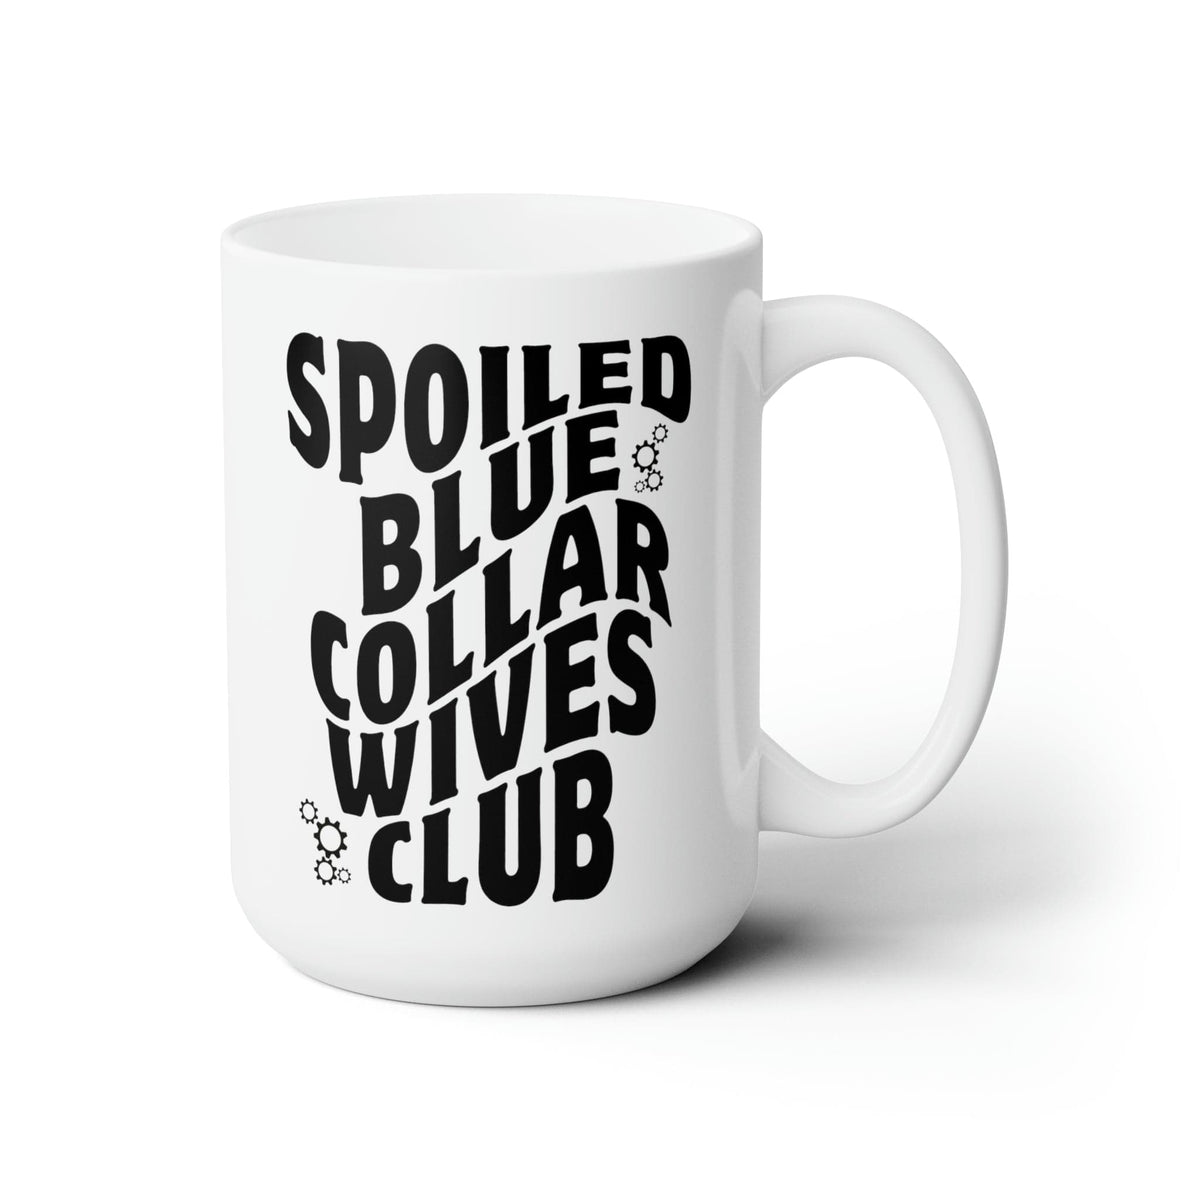 Spoiled Blue Collar Wives Club Ceramic Mug 15oz| Blue Collar Wife Coffee Cup | Great Gift For Wife or Friend Mug TheFringeCultureCollective